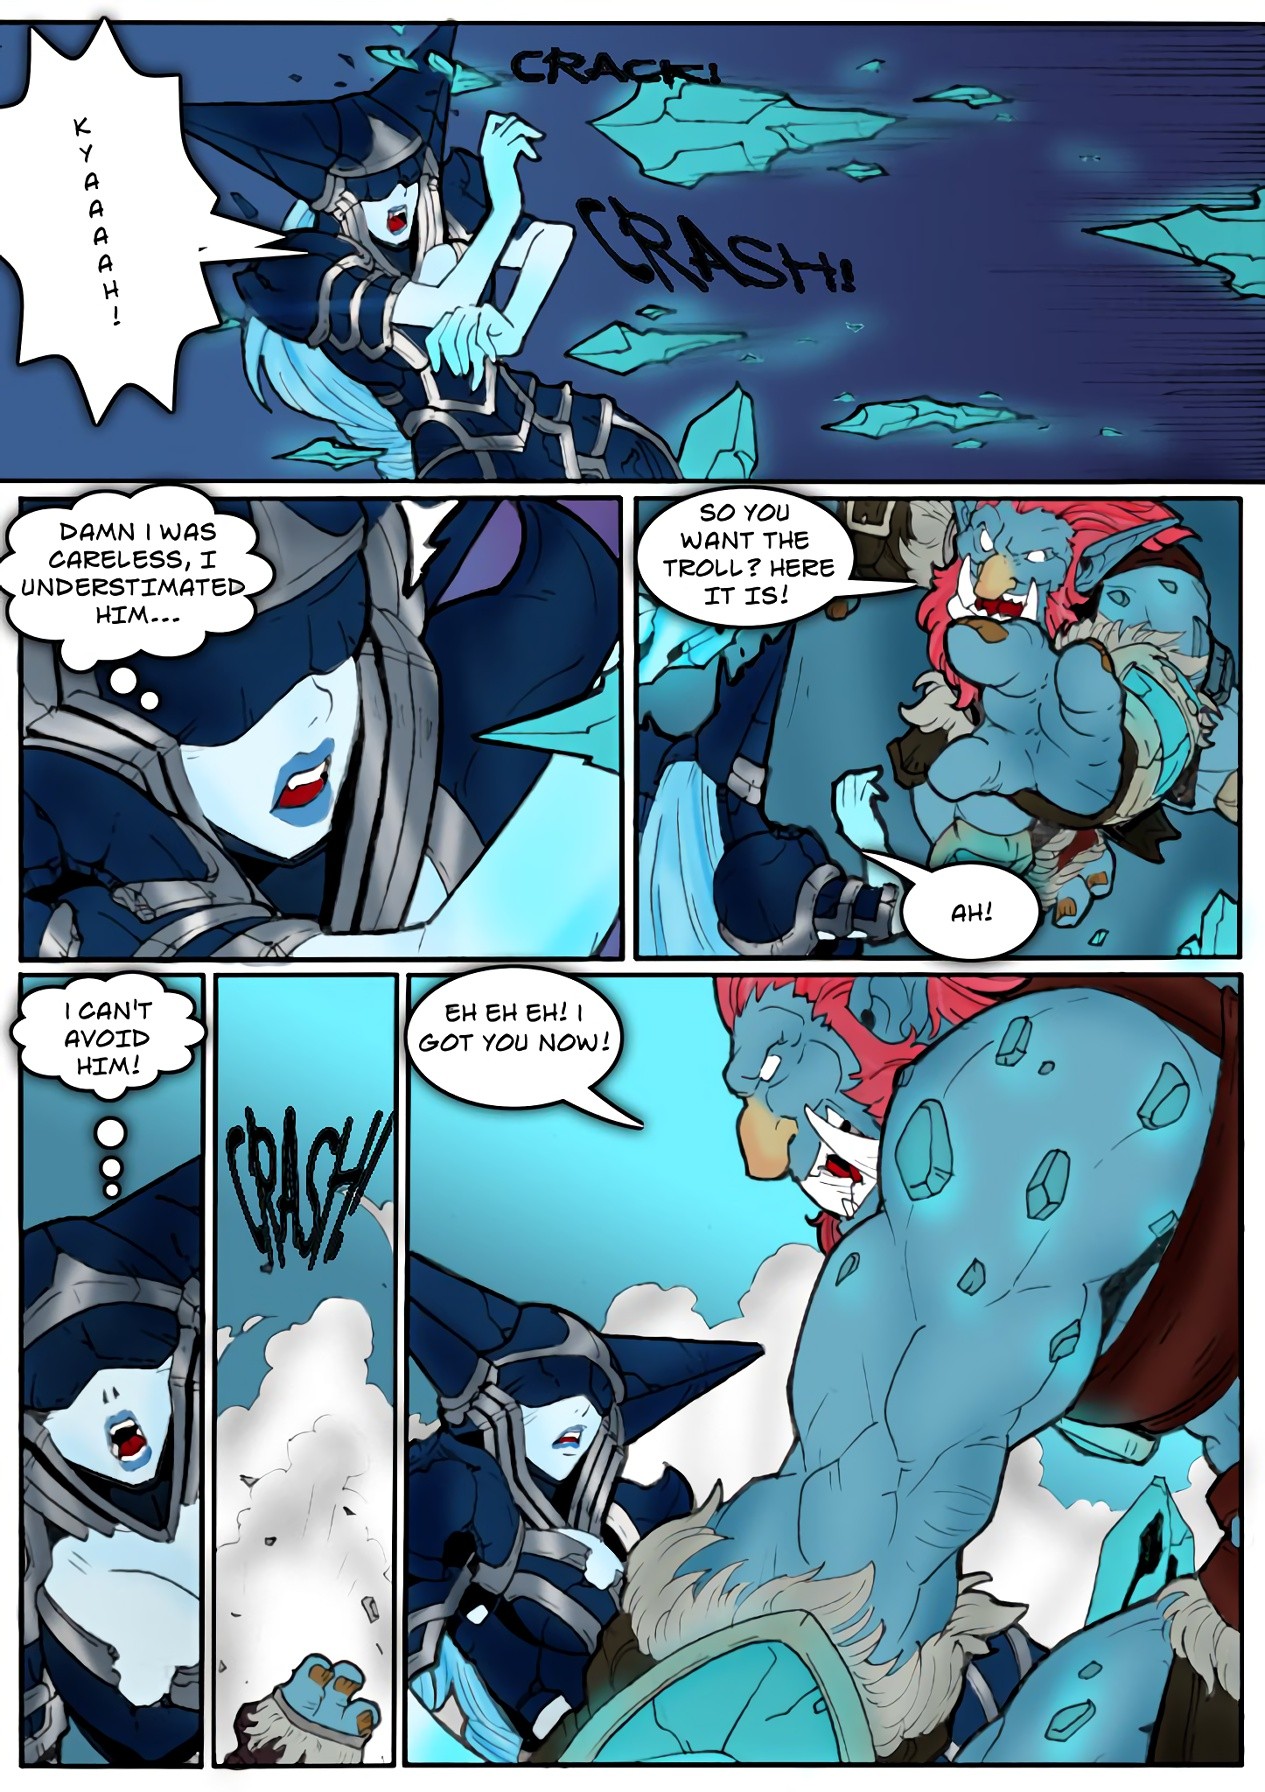 Tales of the Troll King ch. 1 - 3 ] [Colorized] porn comic picture 5